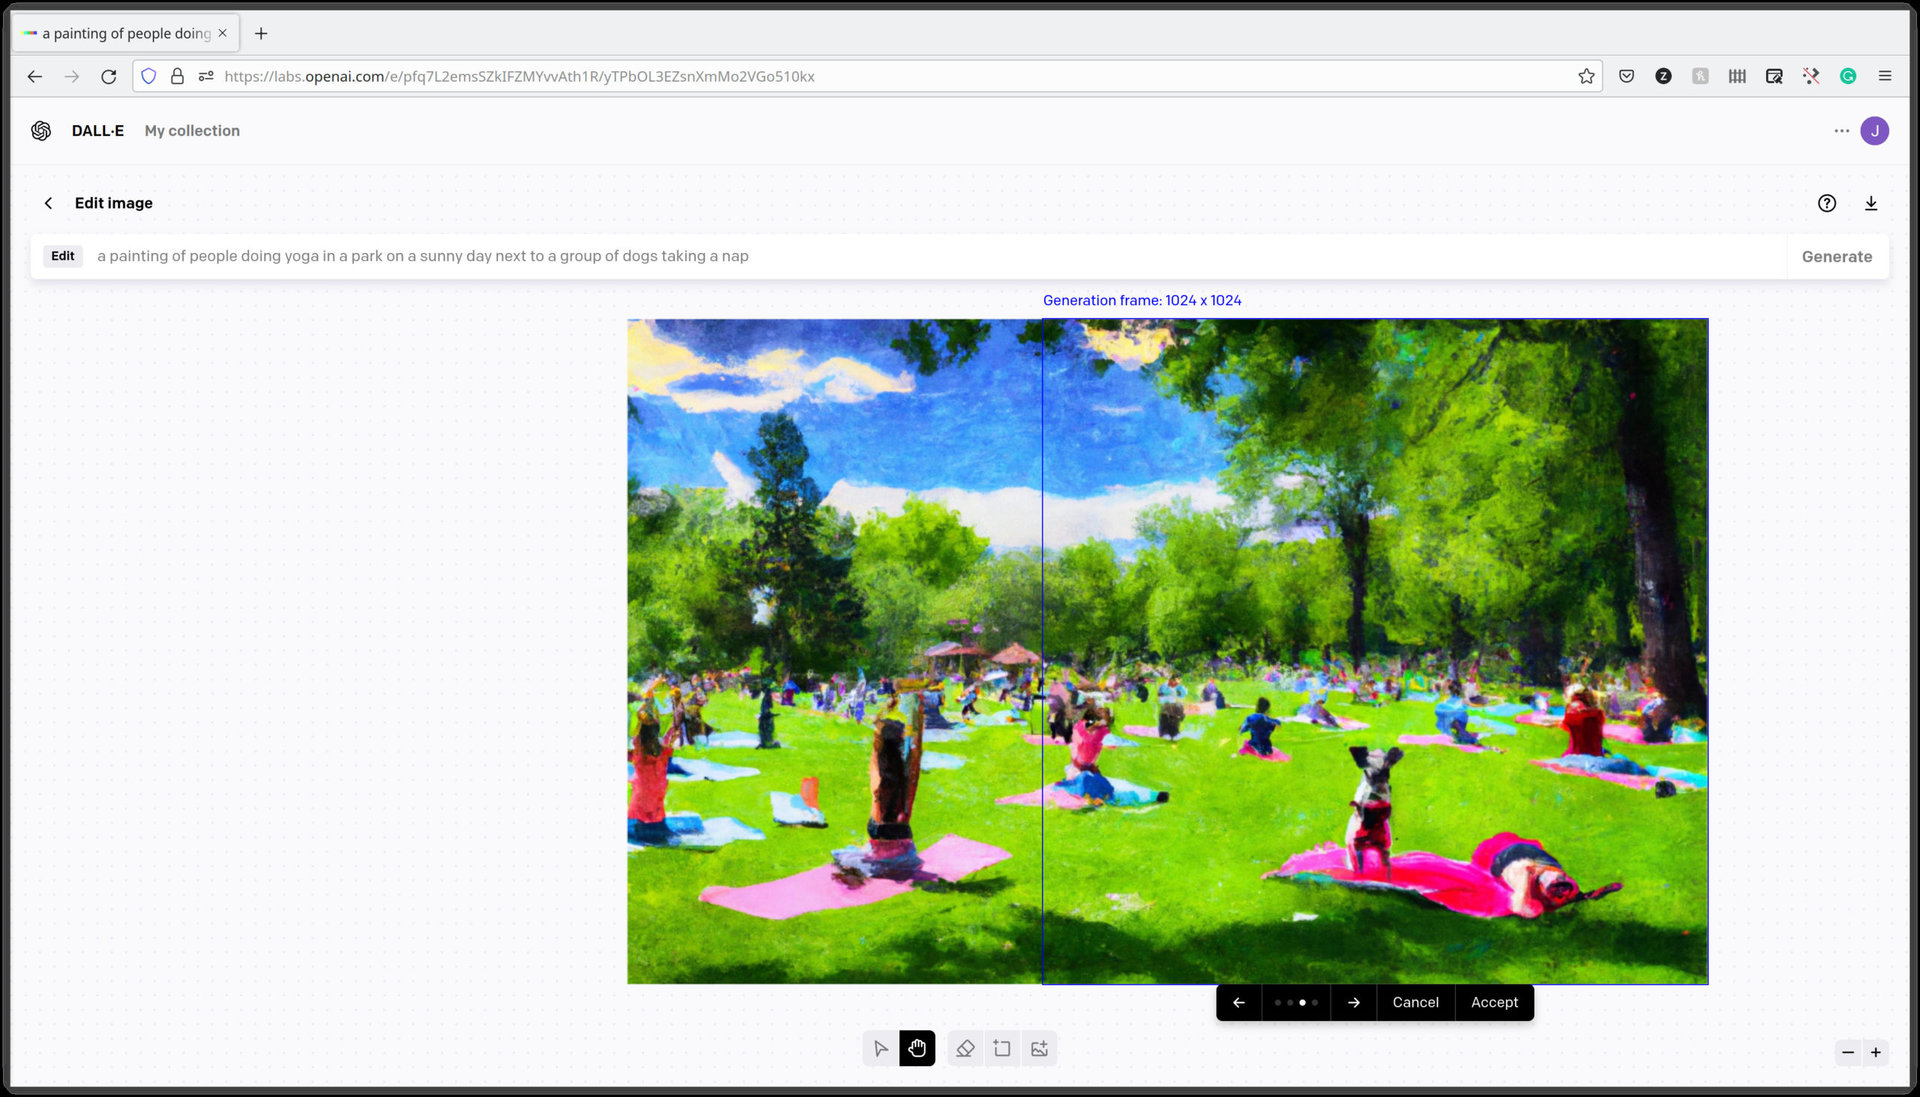 A screenshot of DALL-E 2 generate image from the prompt a painting of people doing yoga in a park on a sunny day next to a group of dogs taking a nap". This is an outpainting of a previously generated image that adds more detail.